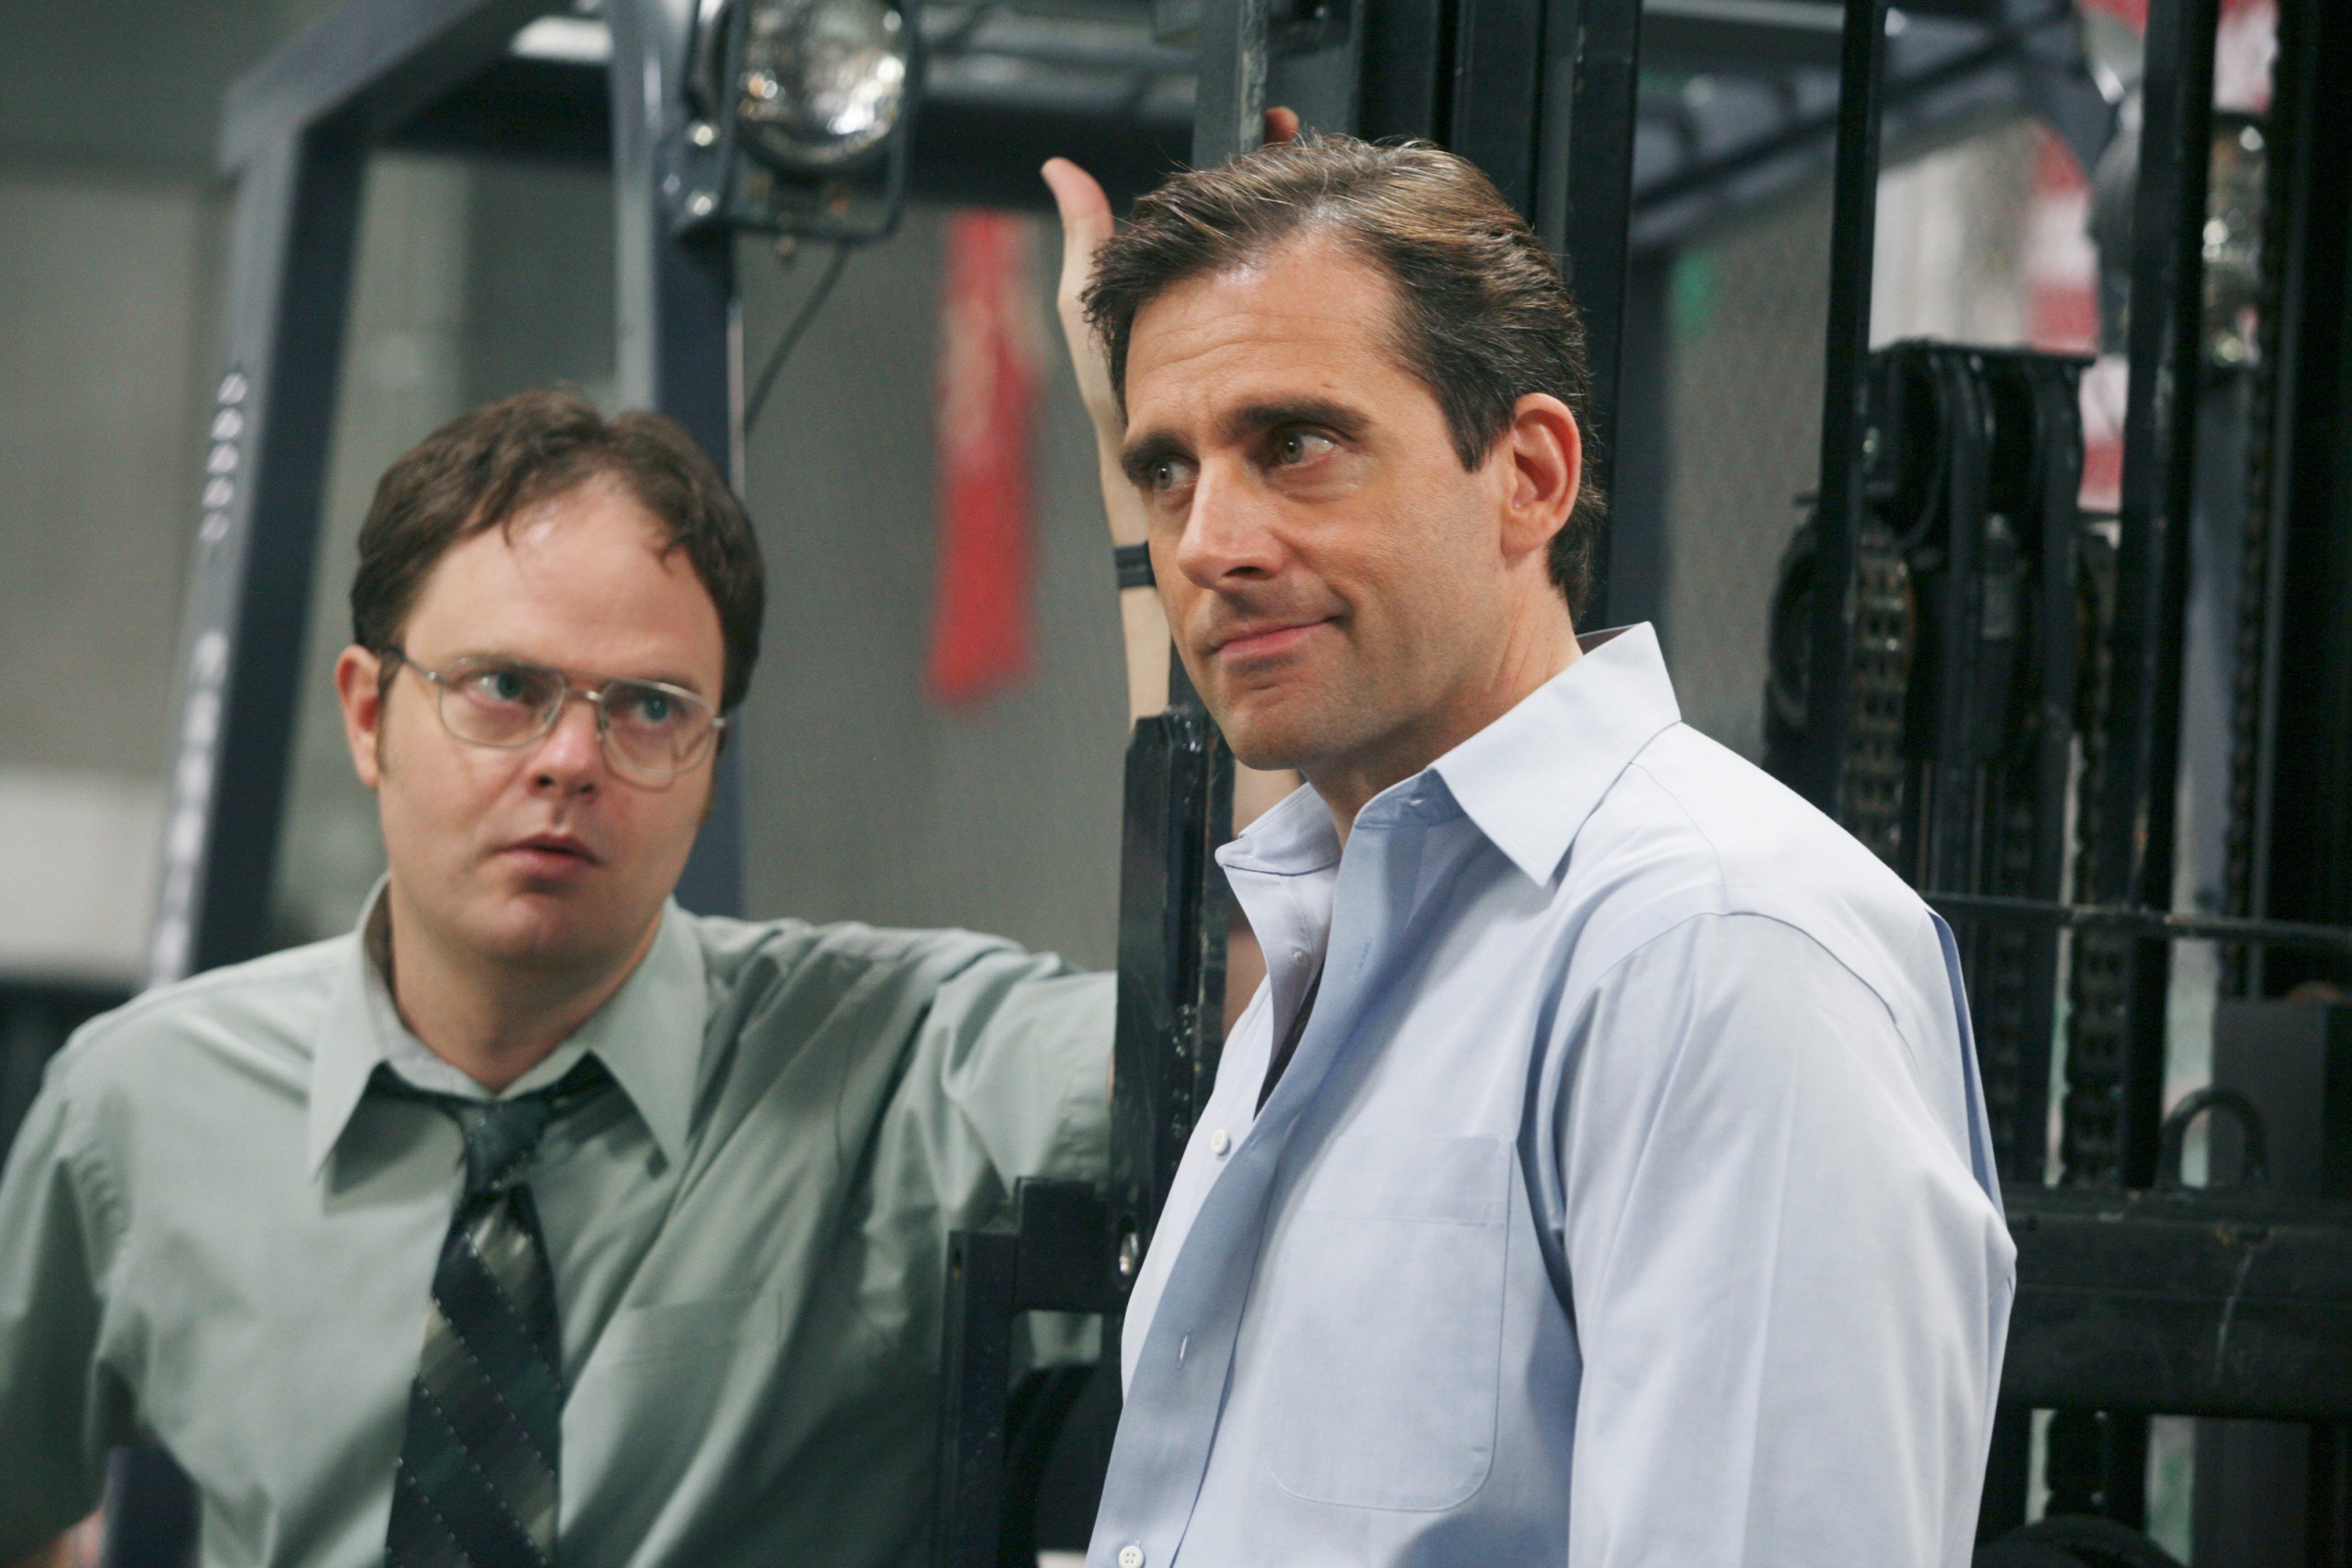 ‘The Office’: Rainn Wilson Says the Show ‘Sent up a Problem’ About This Hot Button Issue